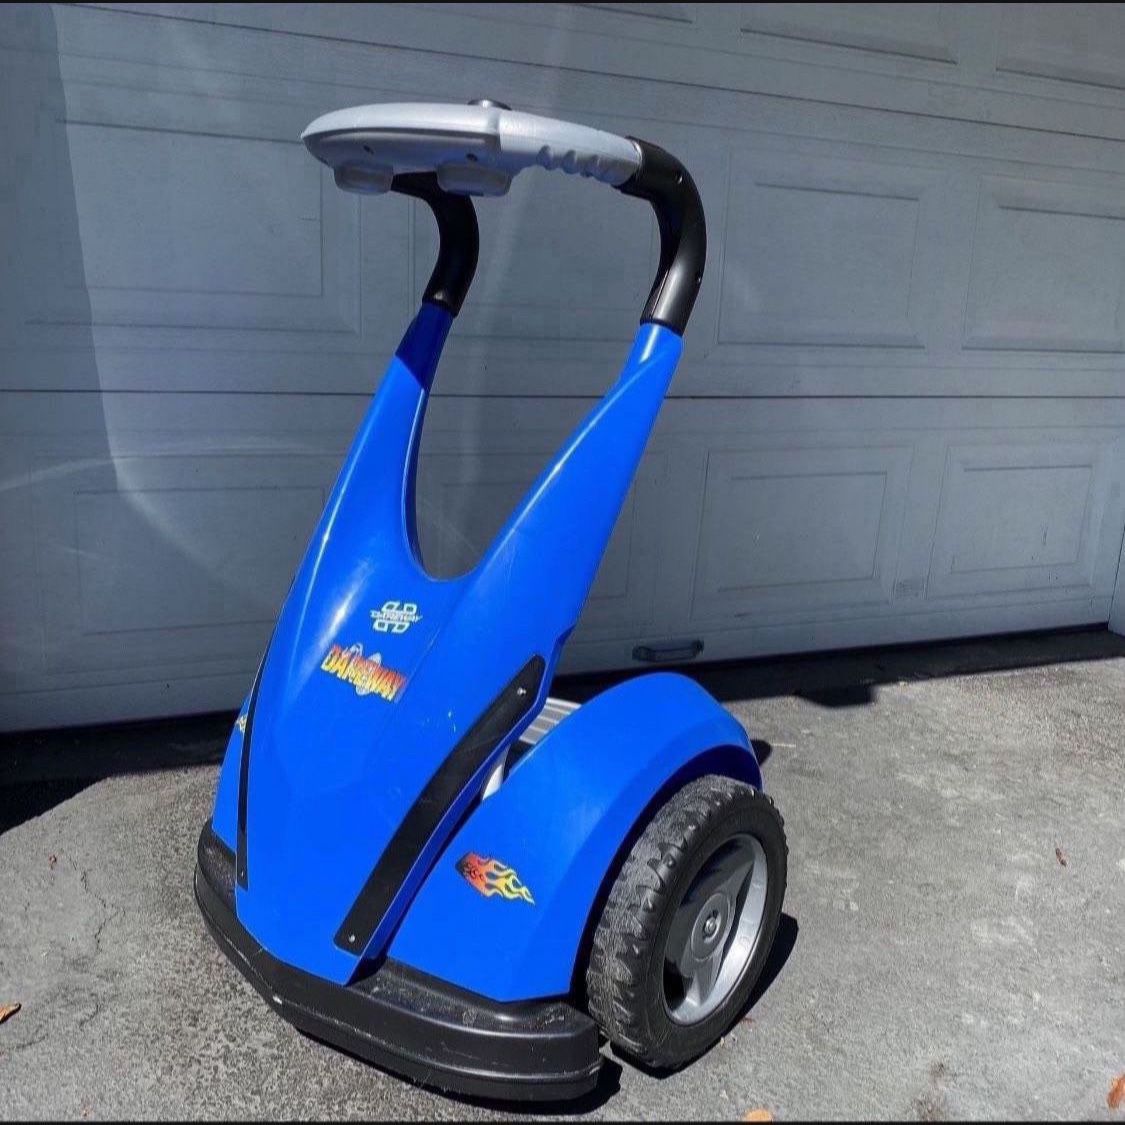 (H38”xL22”xW28”) Works Perfect - 12V Dareway Electric Kids Teen Blue Segway Scooter Car Bike Max 3.8 MPH - FAST (Originally $350) Needs Charger